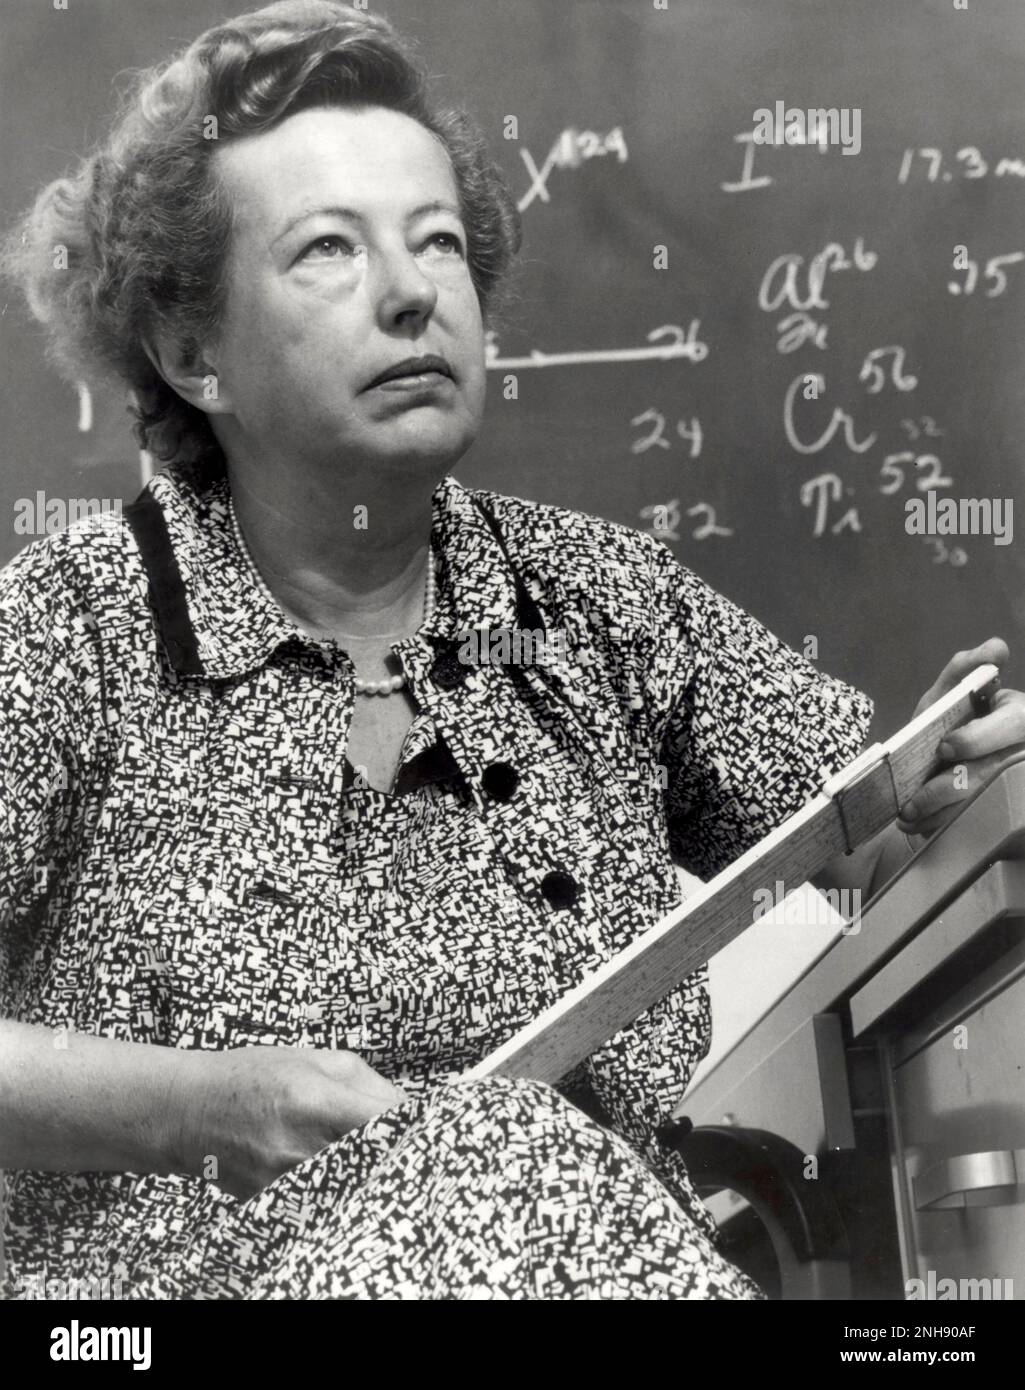 Maria Goeppert-Mayer (1906-1972), German-born American theoretical physicist and Nobel laureate in Physics for proposing the nuclear shell model of the atomic nucleus. She was the second woman to win a Nobel Prize in physics, after Marie Curie. Stock Photo